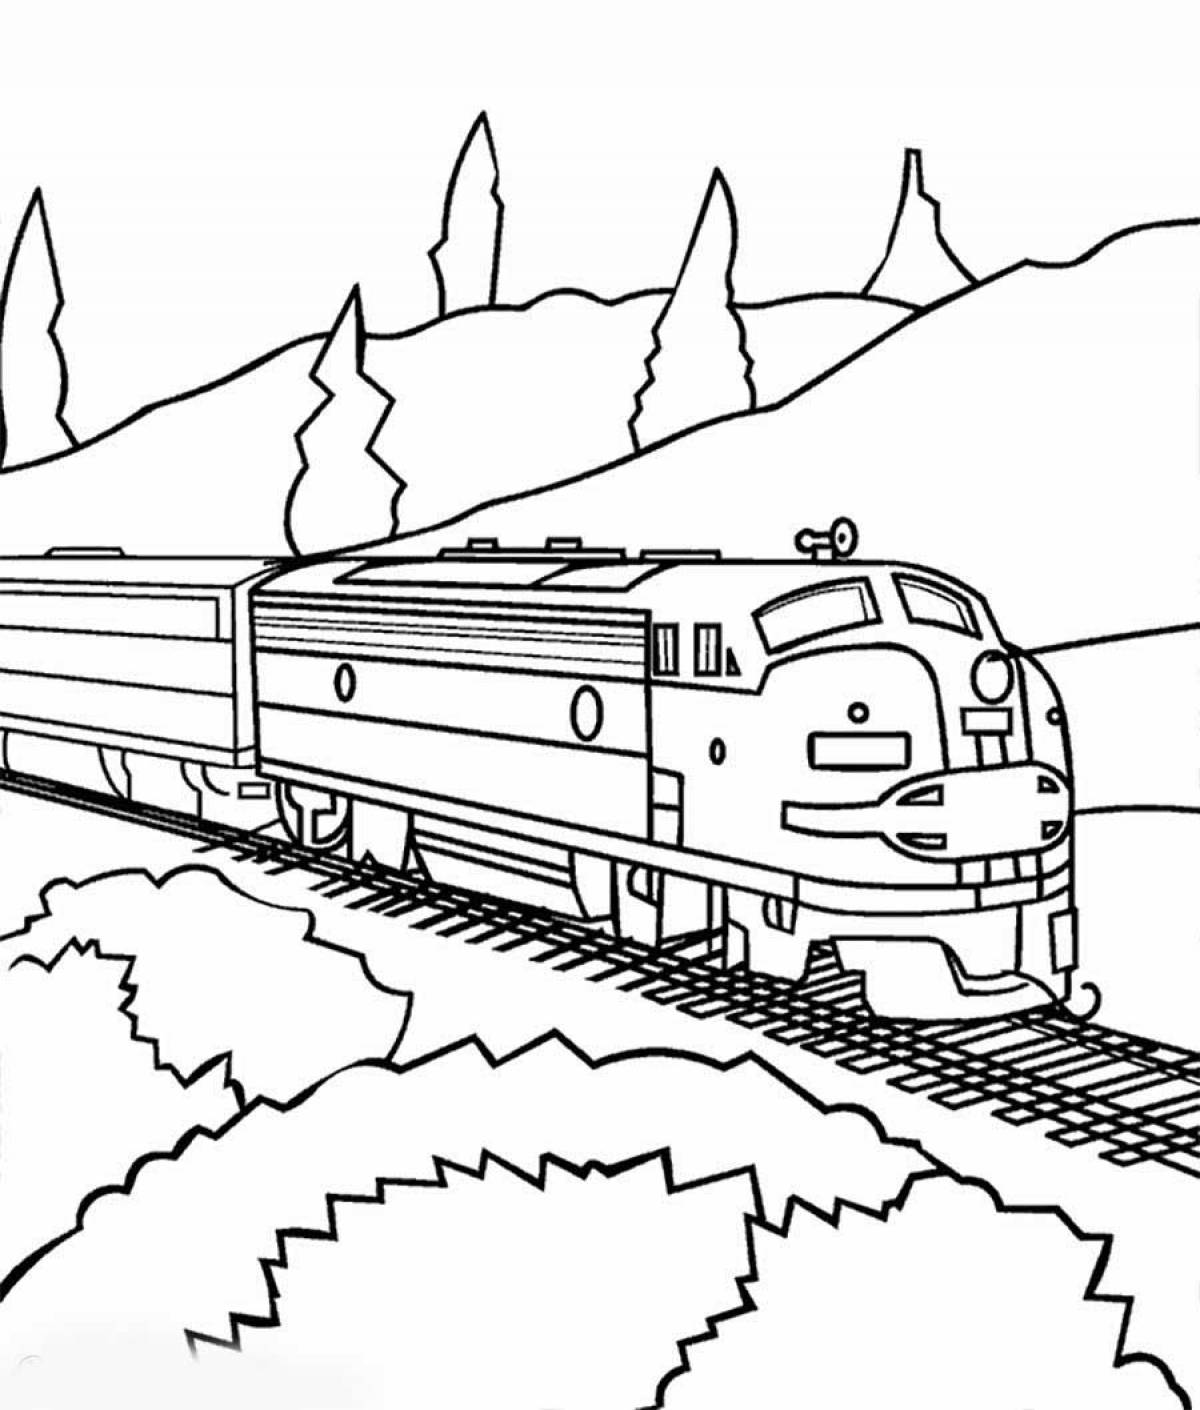 Train in the woods